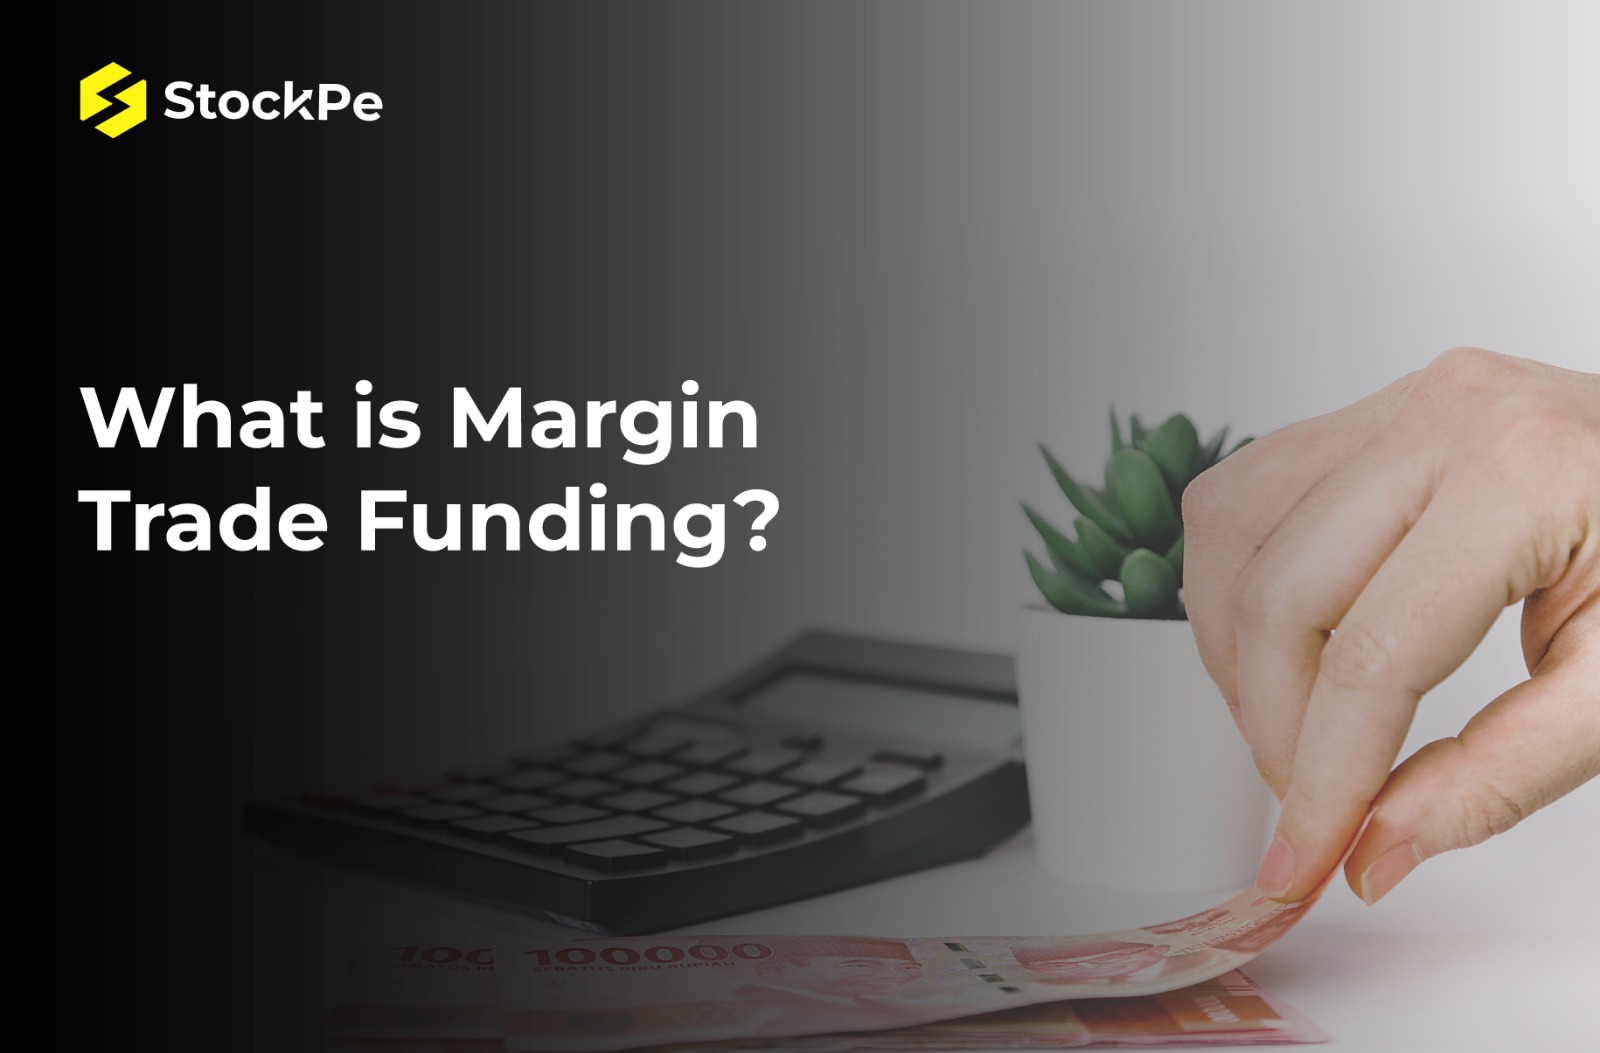 You are currently viewing Margin Funding Meaning: What is Margin Trade Funding? Advantages and Disadvantages.